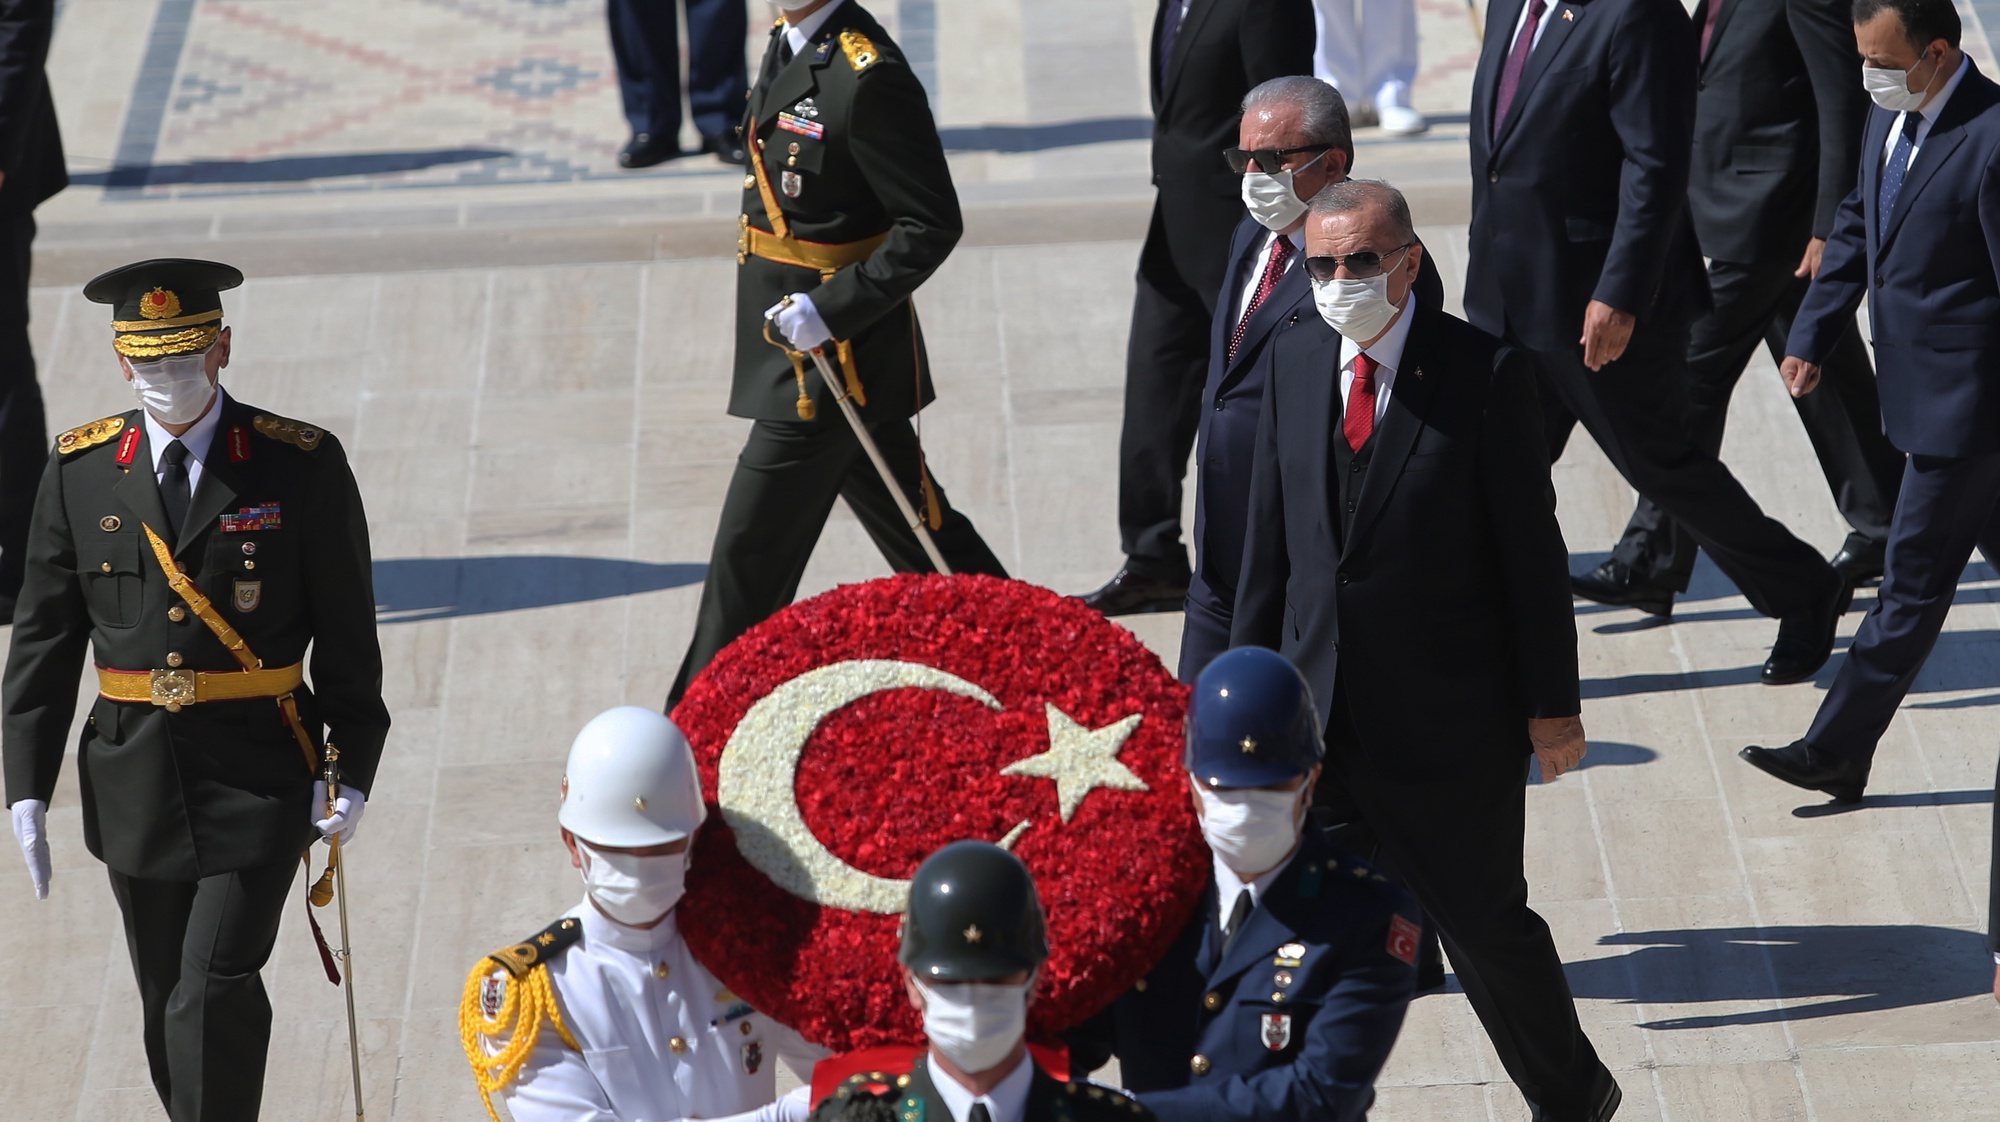 epa08635648 Turkish President Recep Tayyip Erdogan (C) and Turkish Grand National Assembly (TBMM) Speaker Mustafa Sentop (C-L) attend wreath laying ceremony at the Mausoleum of Mustafa Kemal Ataturk, founder of the modern Turkey, during a parade to mark Victory Day in Ankara, Turkey, 30 August 2020. Turkey celebrates its Victory Day in commemoration of the Battle of Dumlupinar, a key victory over Greece on 30 August 1922 in Turkey&#039;s War of Independence.  EPA/STR